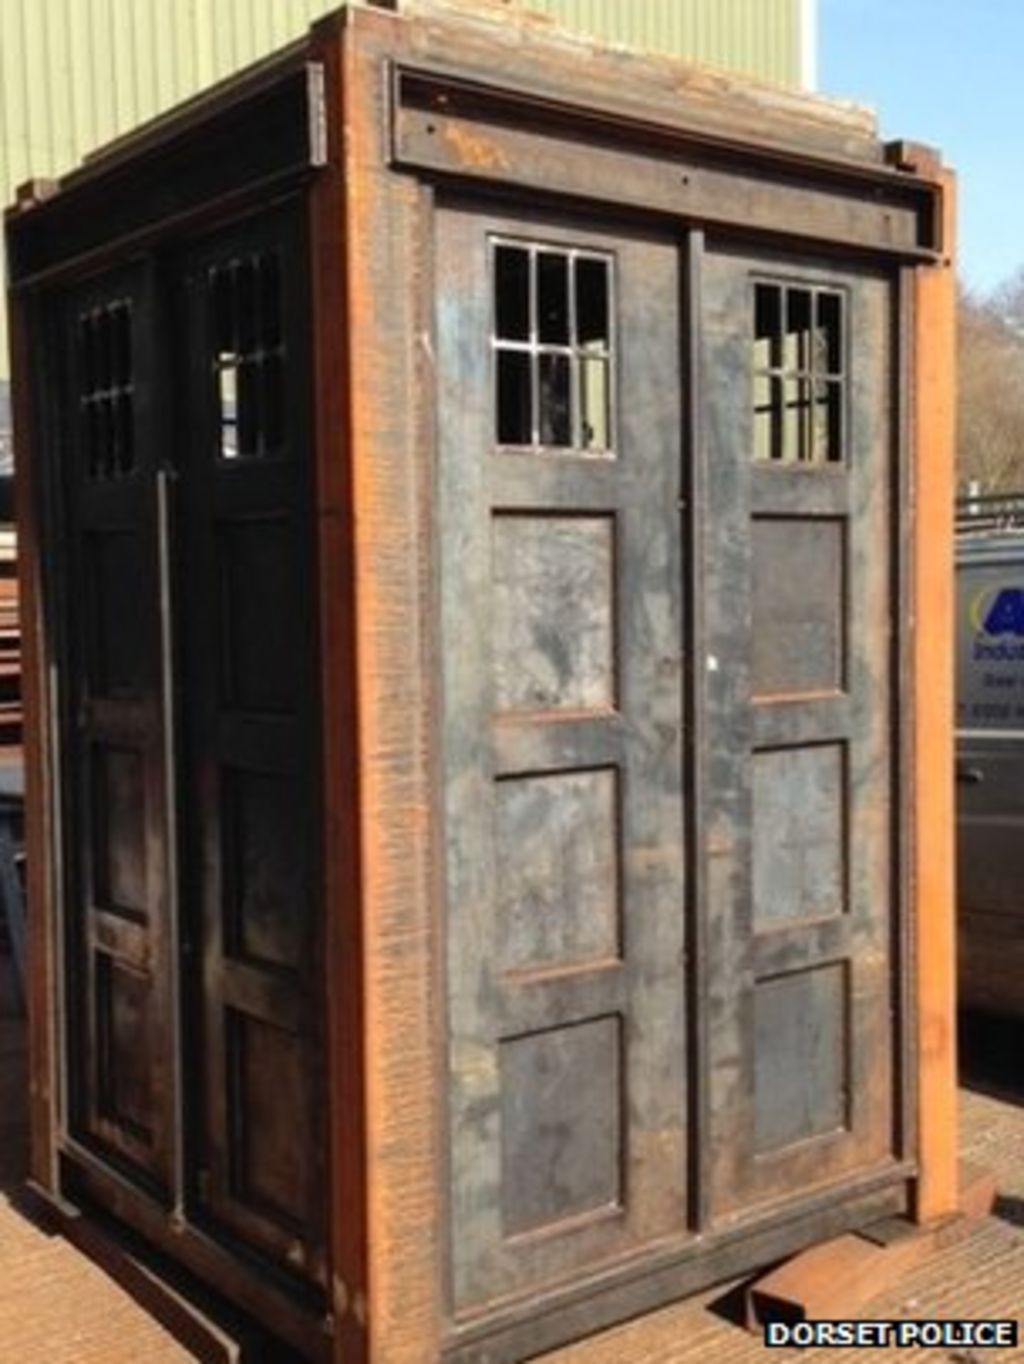 Doctor Who Fans Excited By Boscombe Tardis Police Box Bbc News